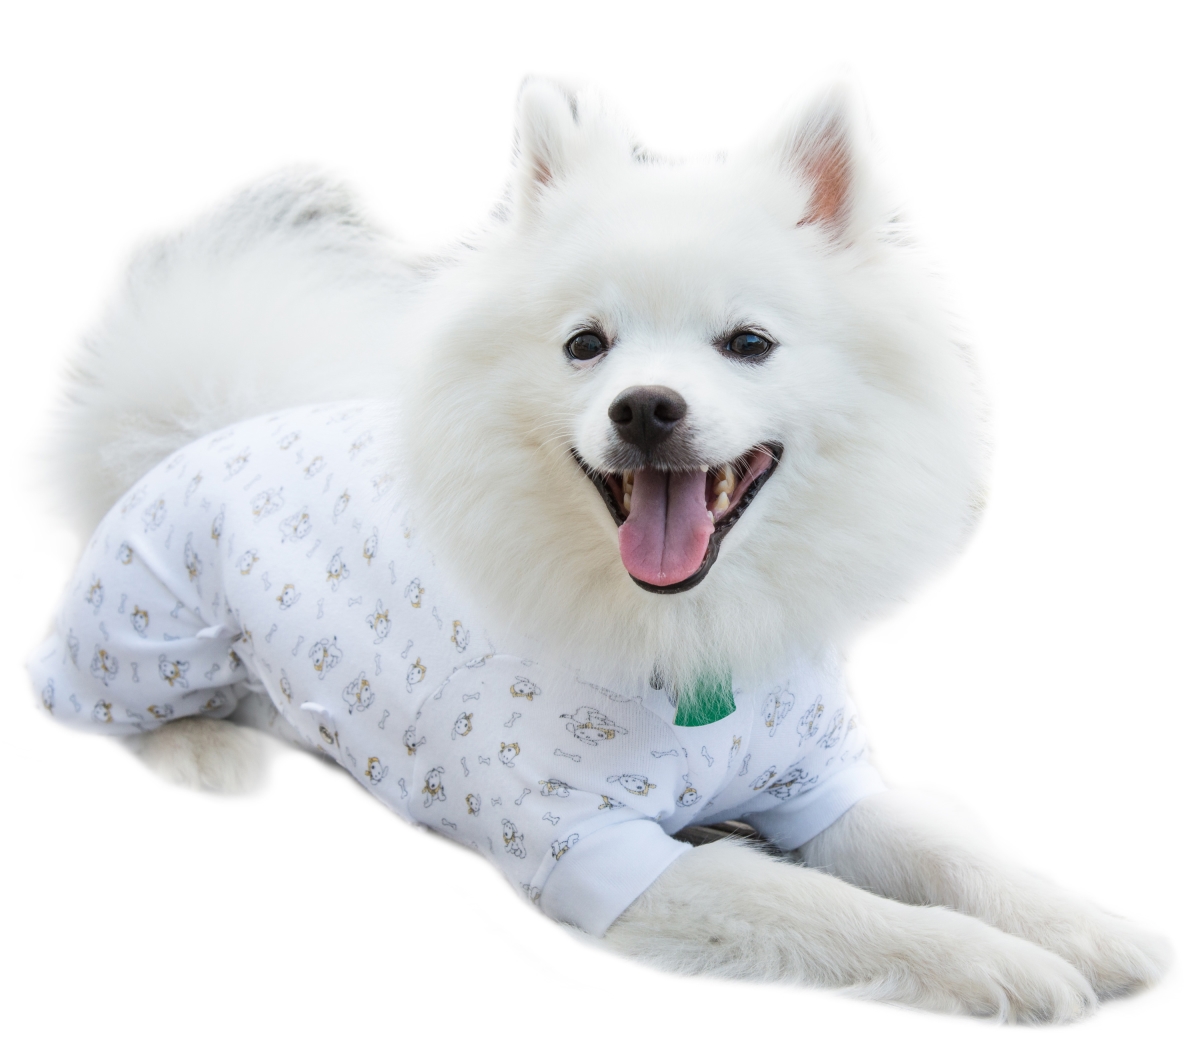 Xl Adj Fit Pullover Ss Puppy Pr Adjustable Fit Puppy Print Pullover With Short Sleeve For Pets - Extra Large